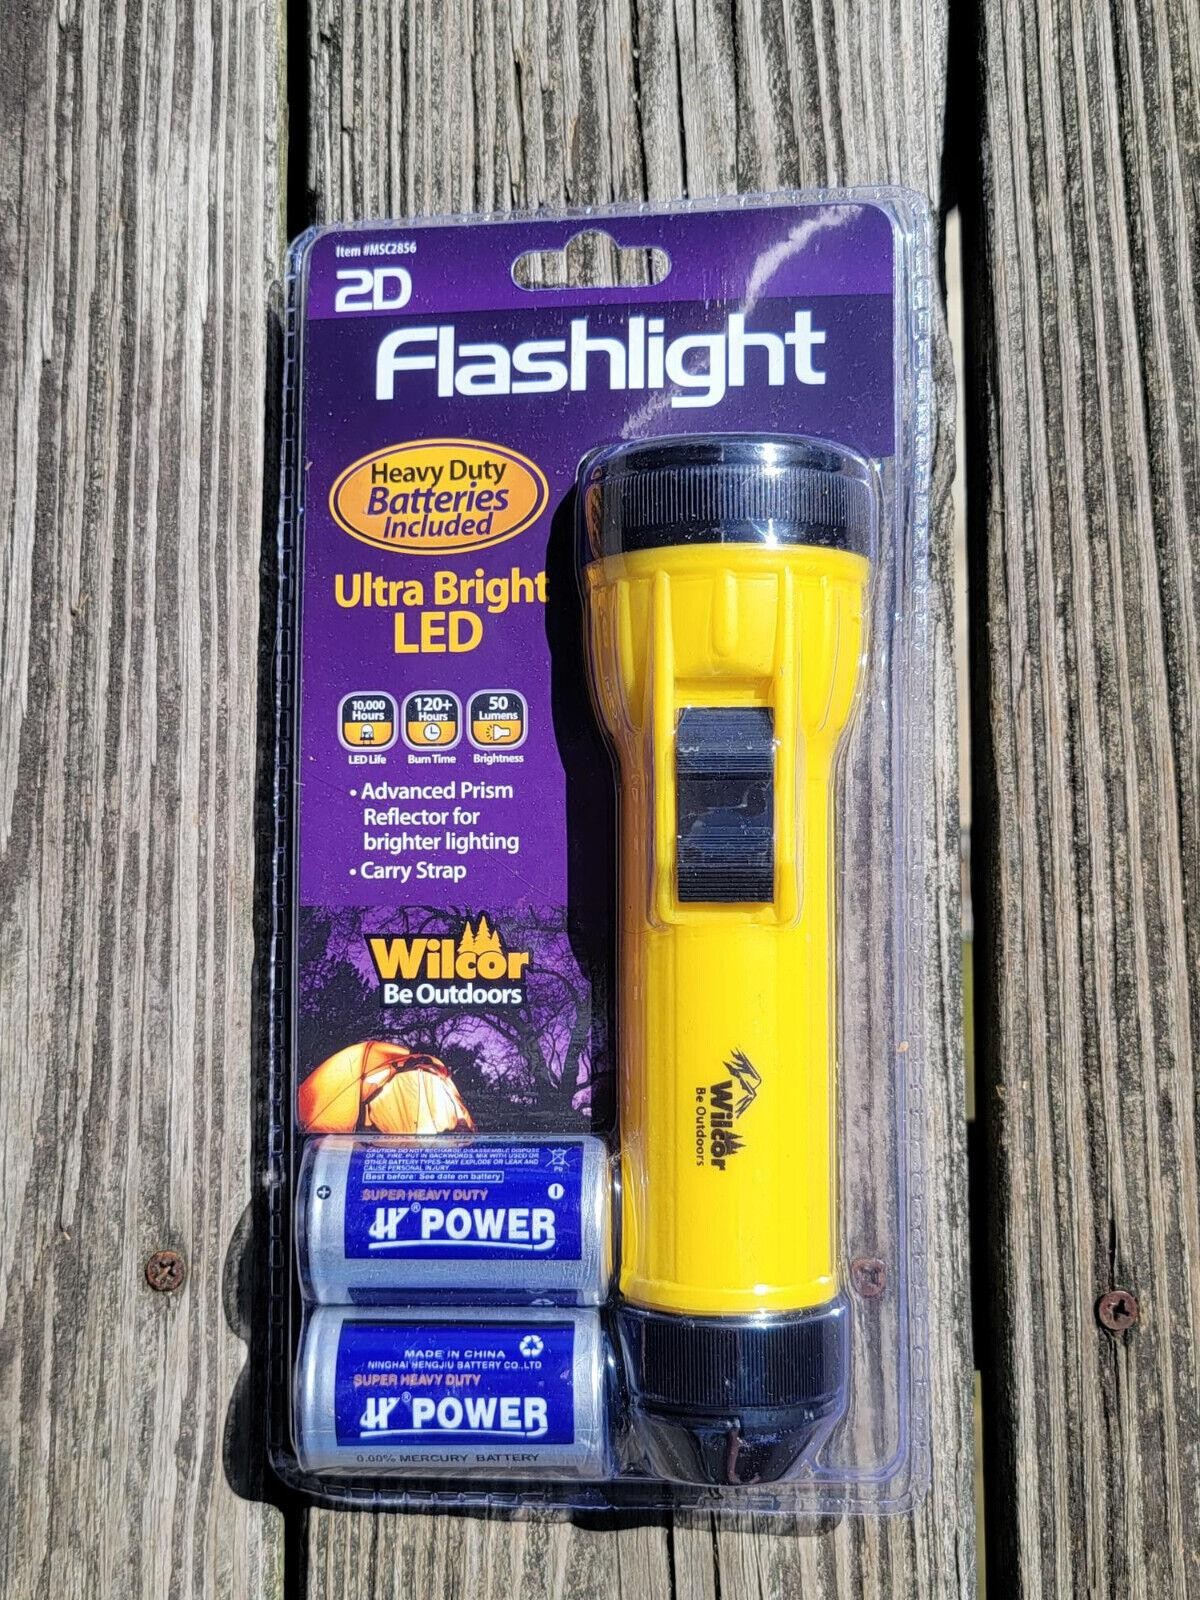 Flashlight 2D with Batteries 50 Lumens Blue Ultra Bright LED Carry Strap Yellow